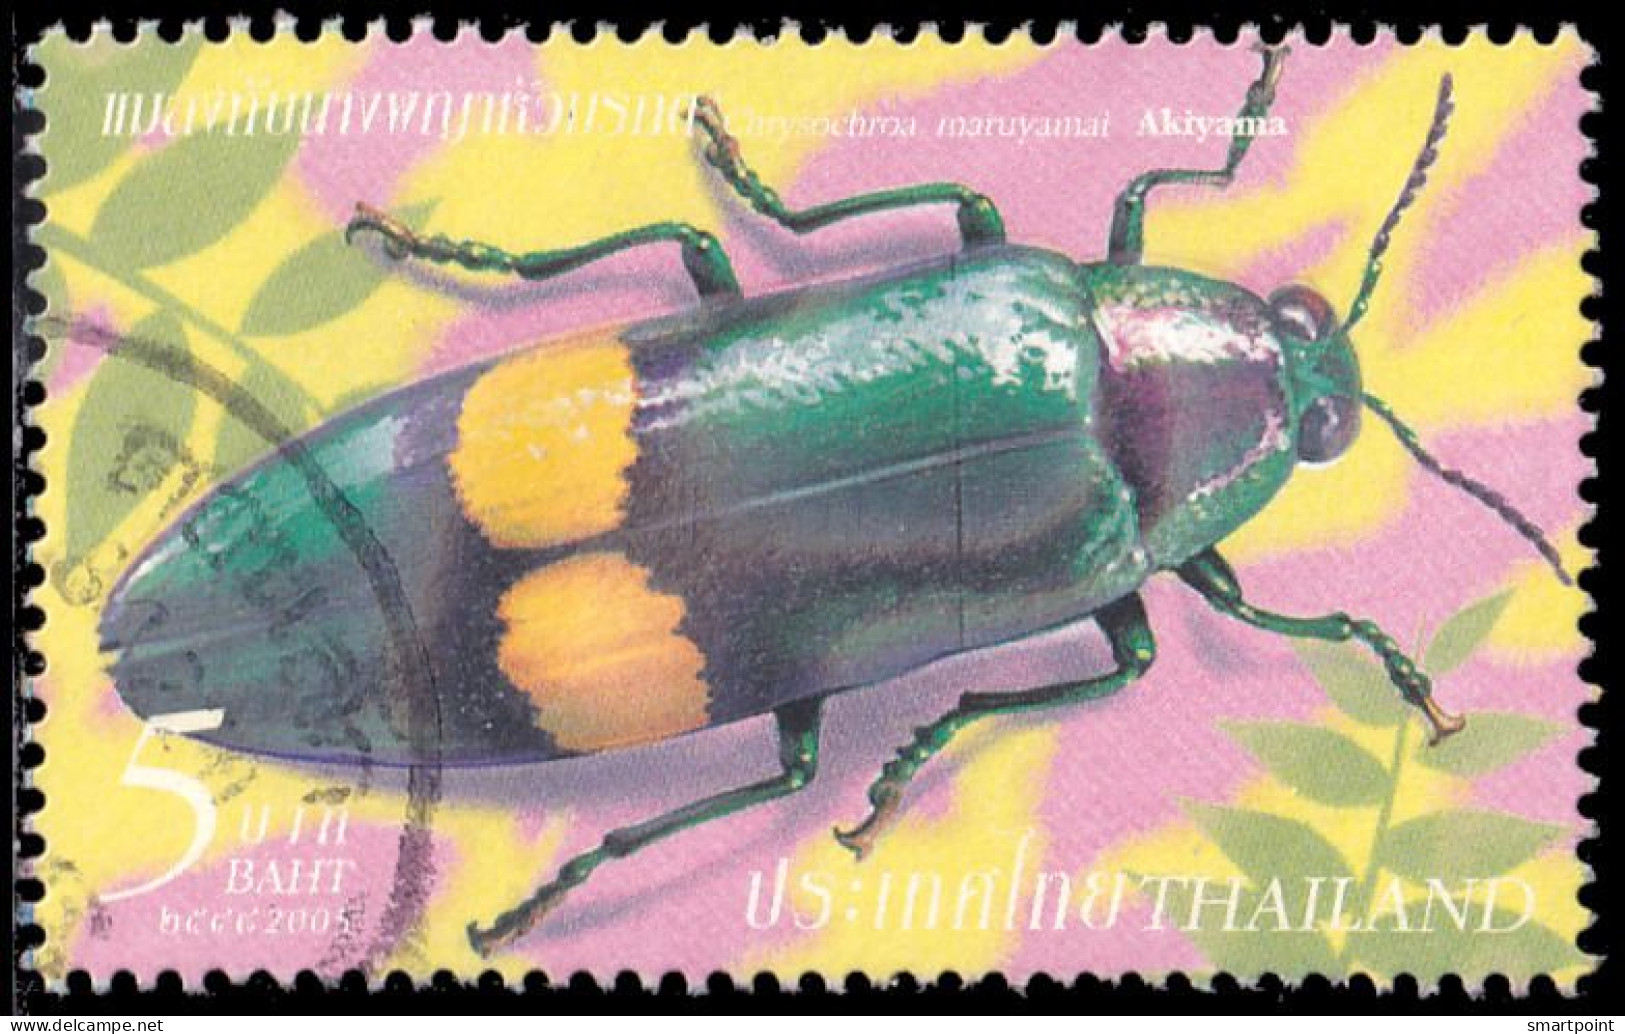 Thailand Stamp 2005 Insects (3rd Series) 5 Baht - Used - Thaïlande